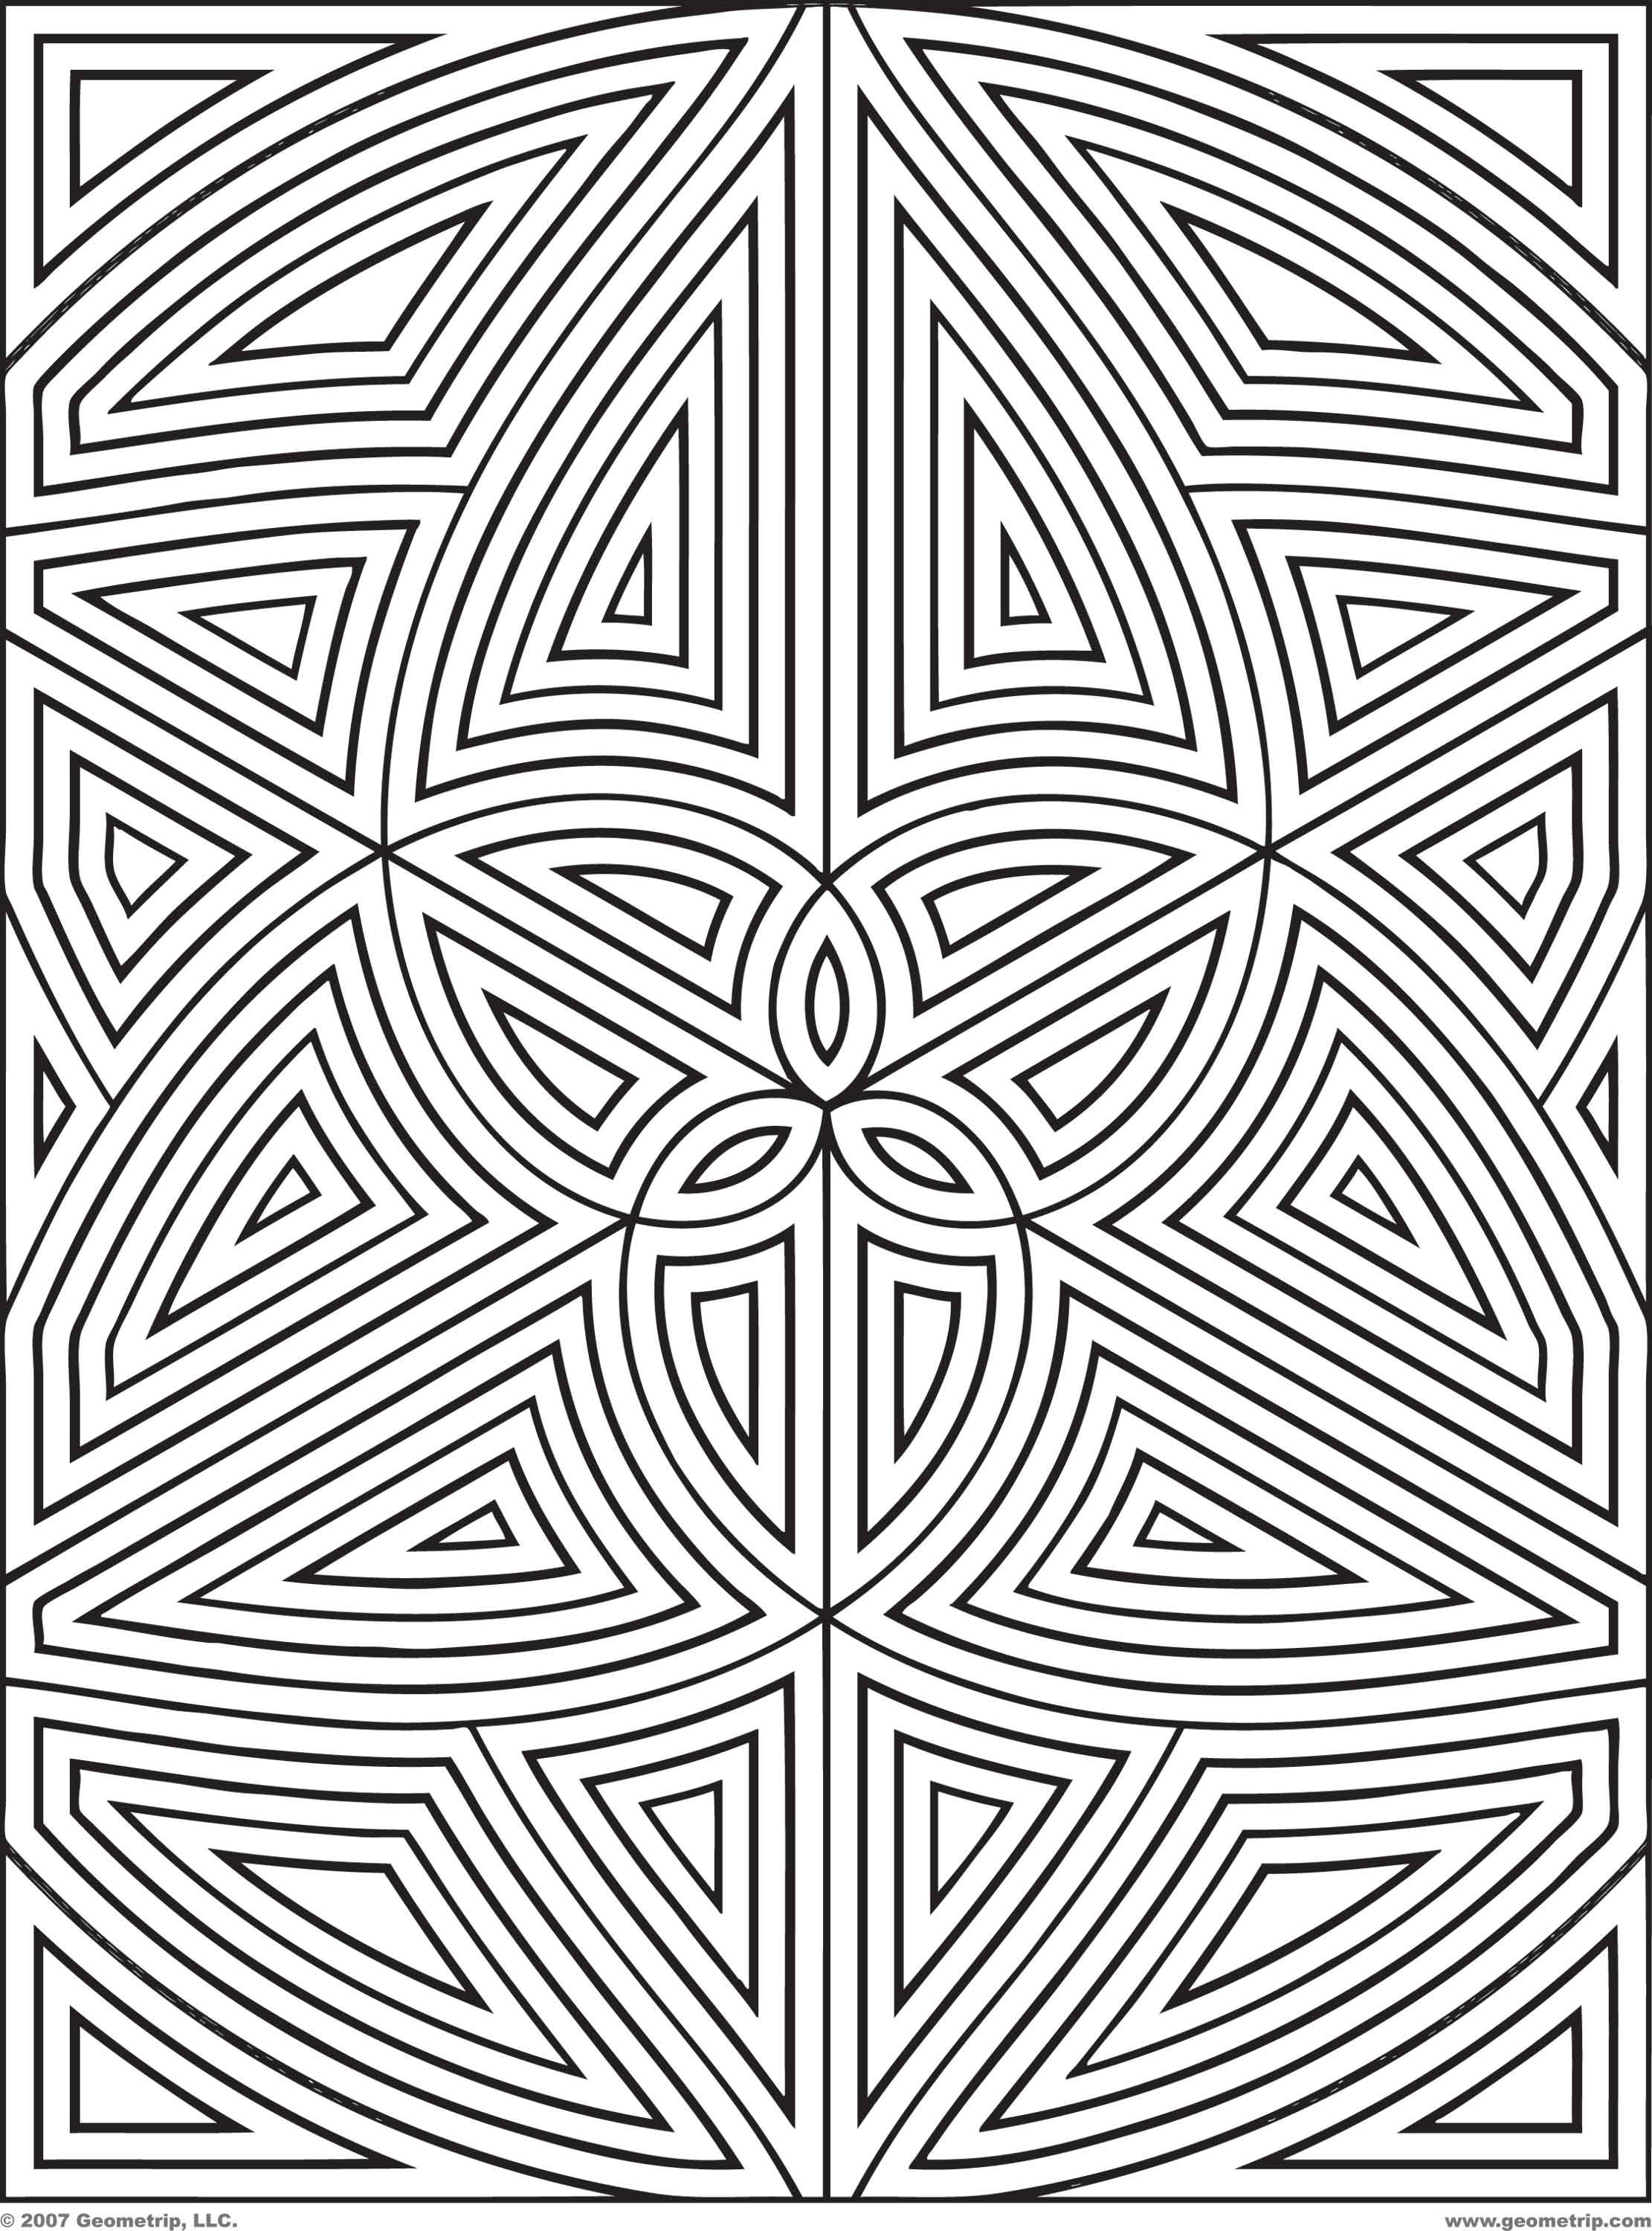 Free Geometric Coloring Pages For Adults
 Many Geometric Pattern Coloring Pages for Adults